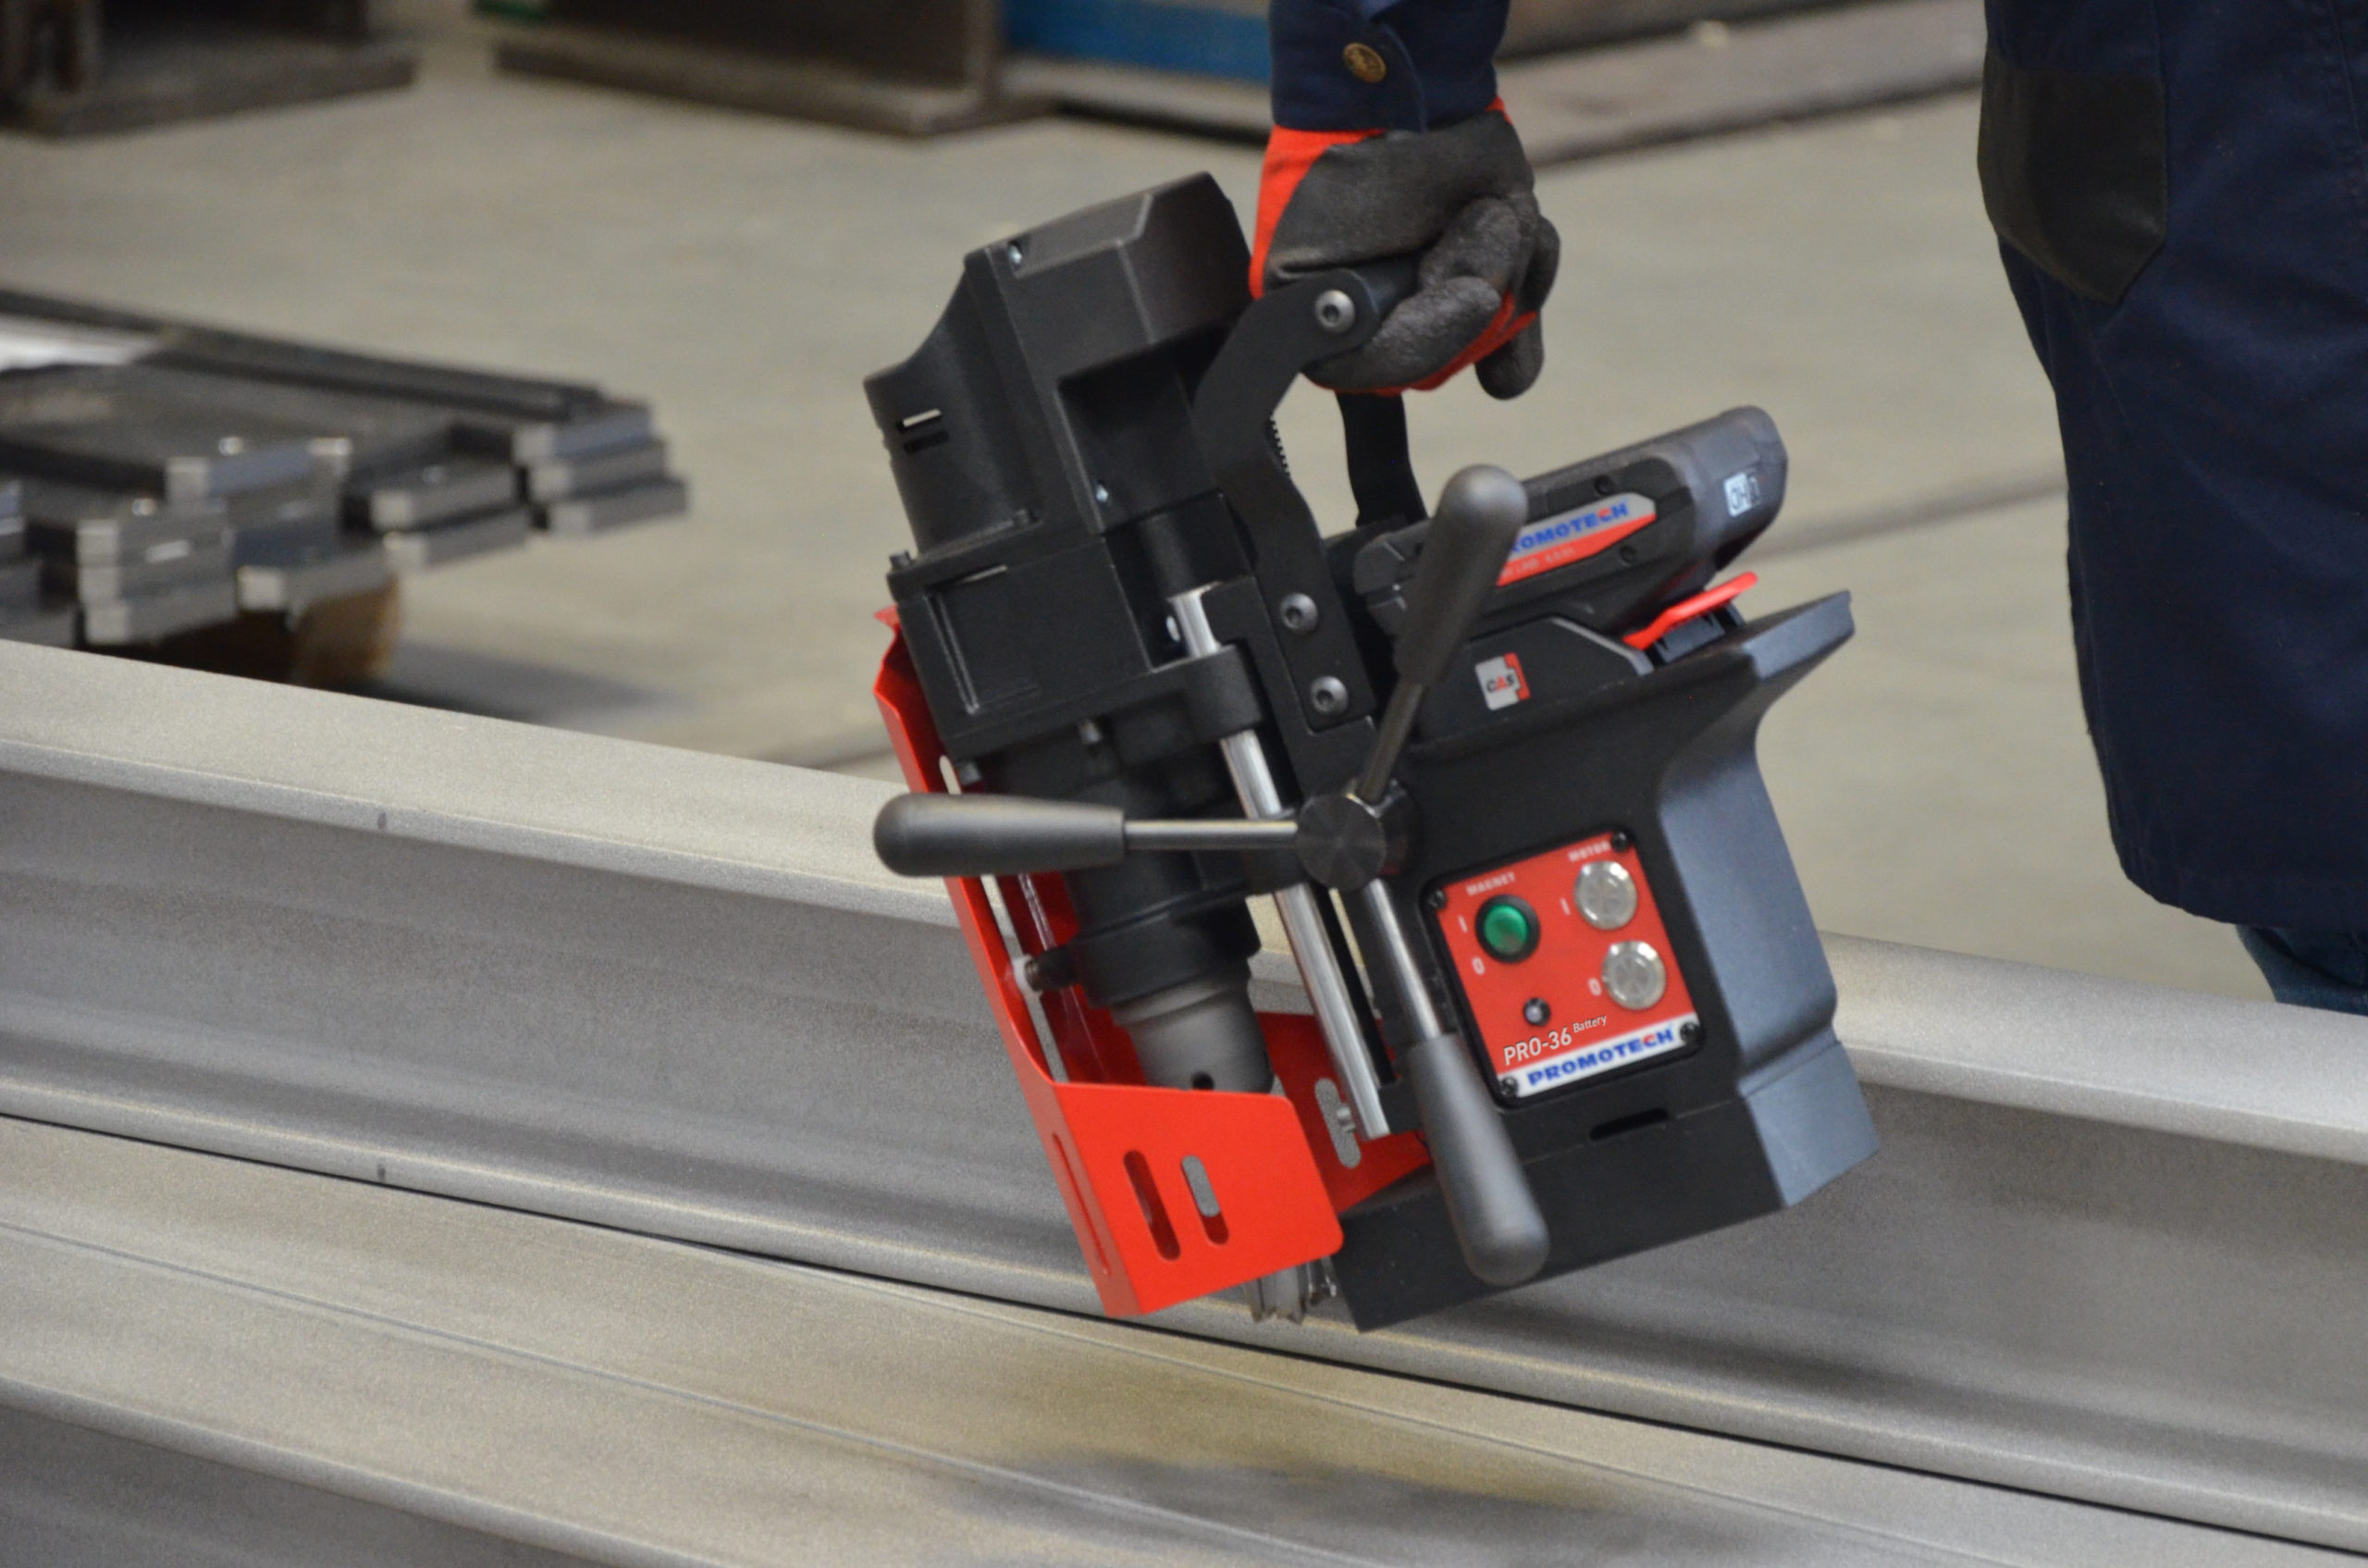 The PRO-36 Battery-Powered Cordless Drilling Machine